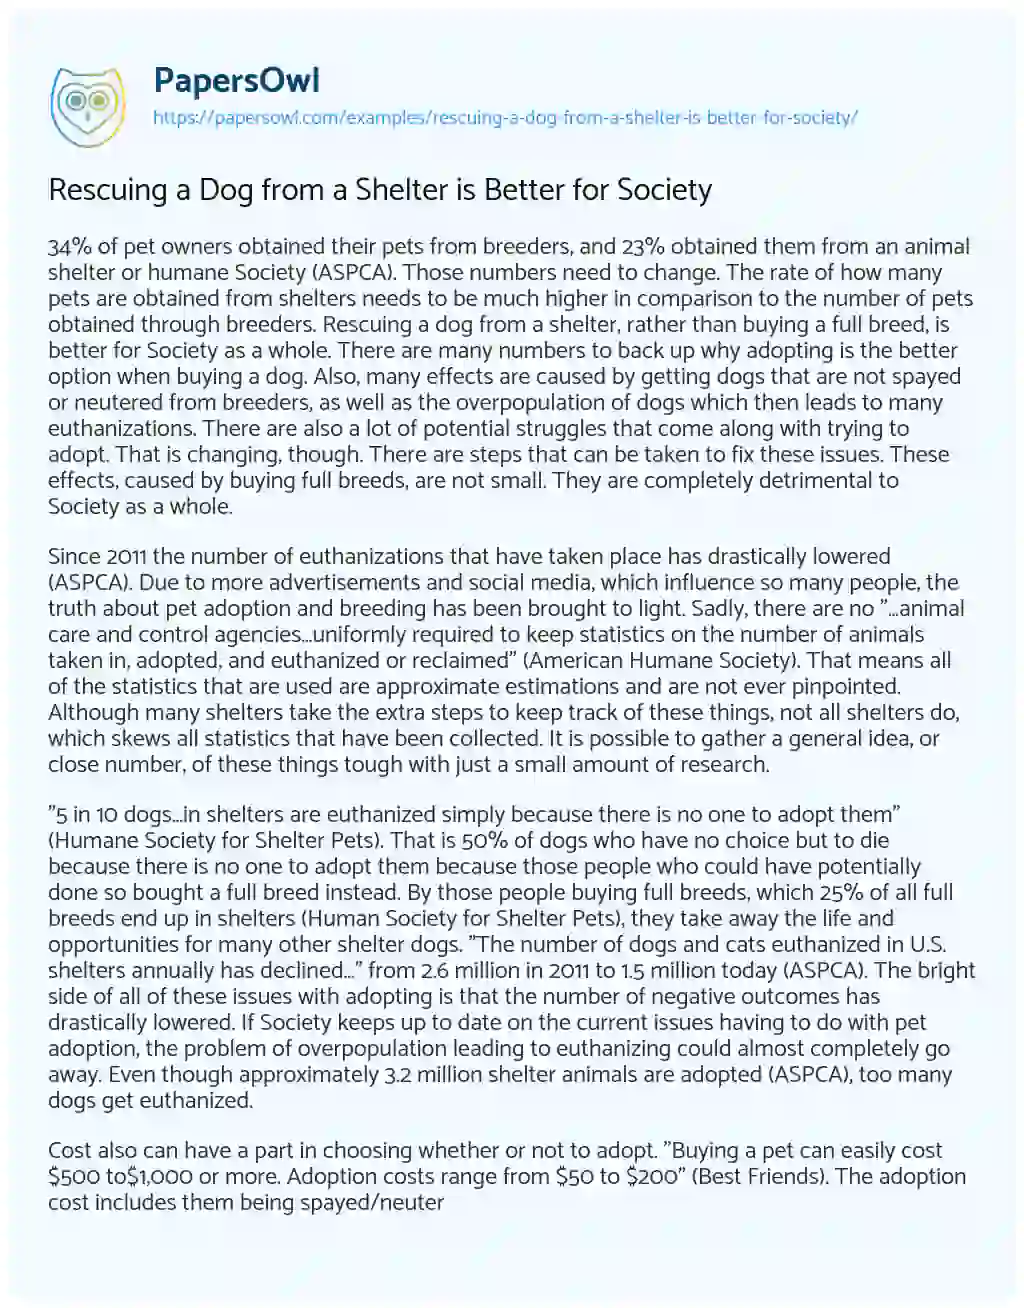 Essay on Rescuing a Dog from a Shelter is Better for Society